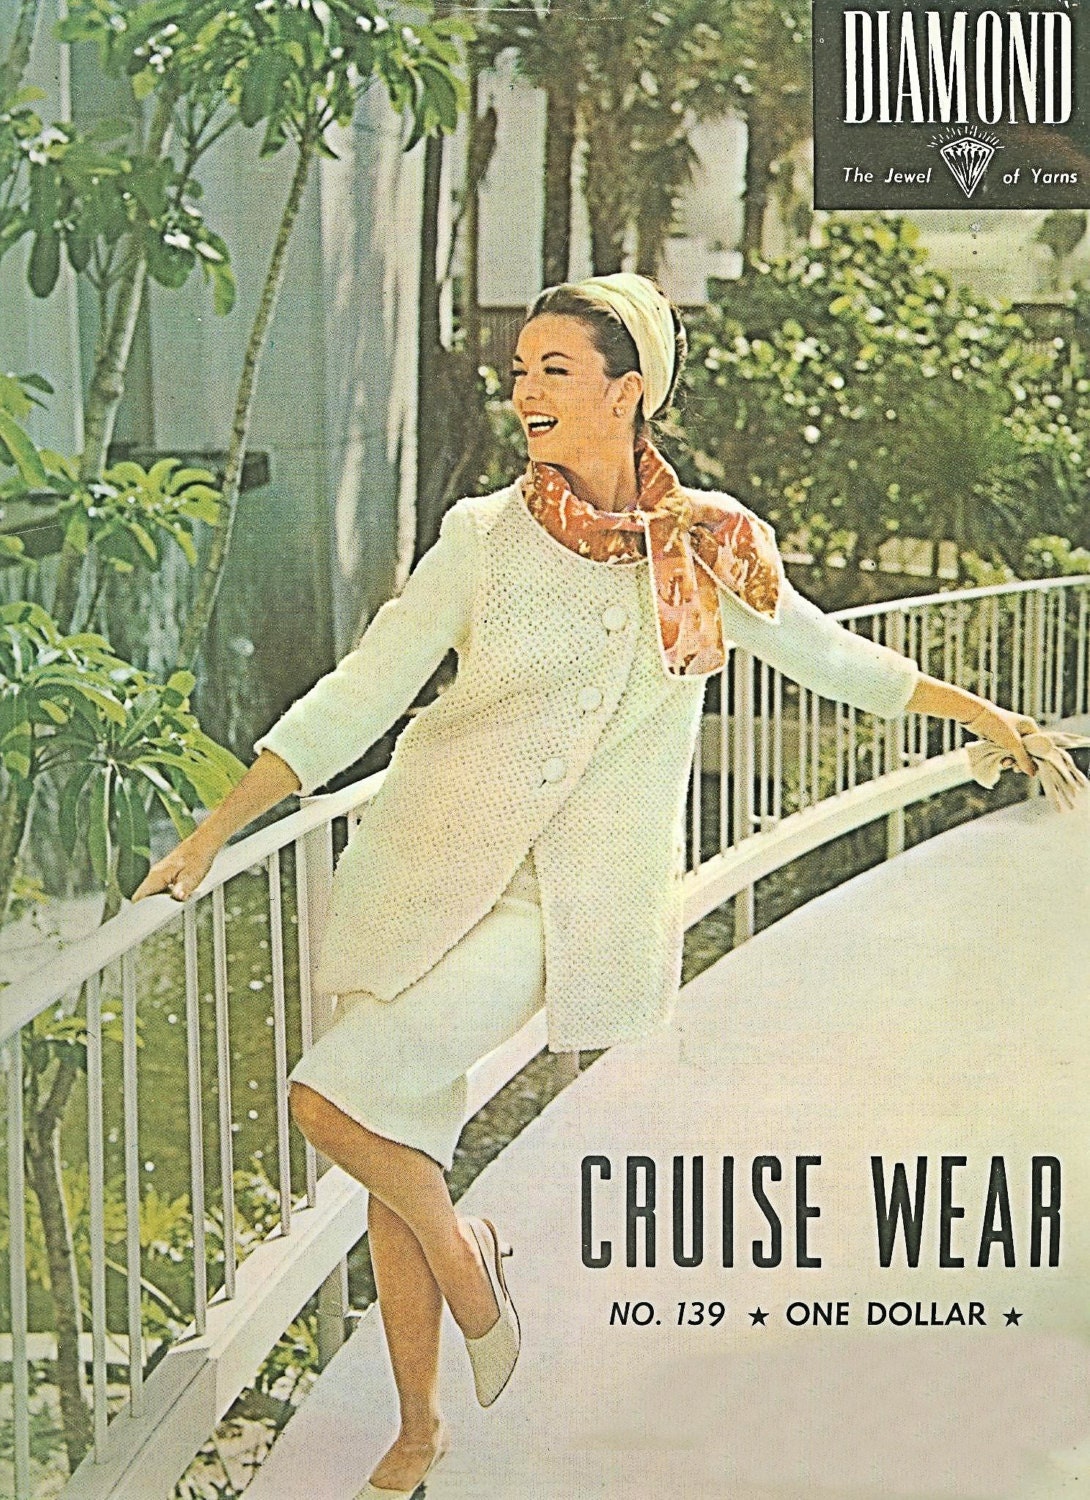 Vintage Knit~Crochet Patterns Cruise Wear 60/'s Dresses Suits Coat Cardigans Pullovers Evening Shells Instant PDF Download Reproduction